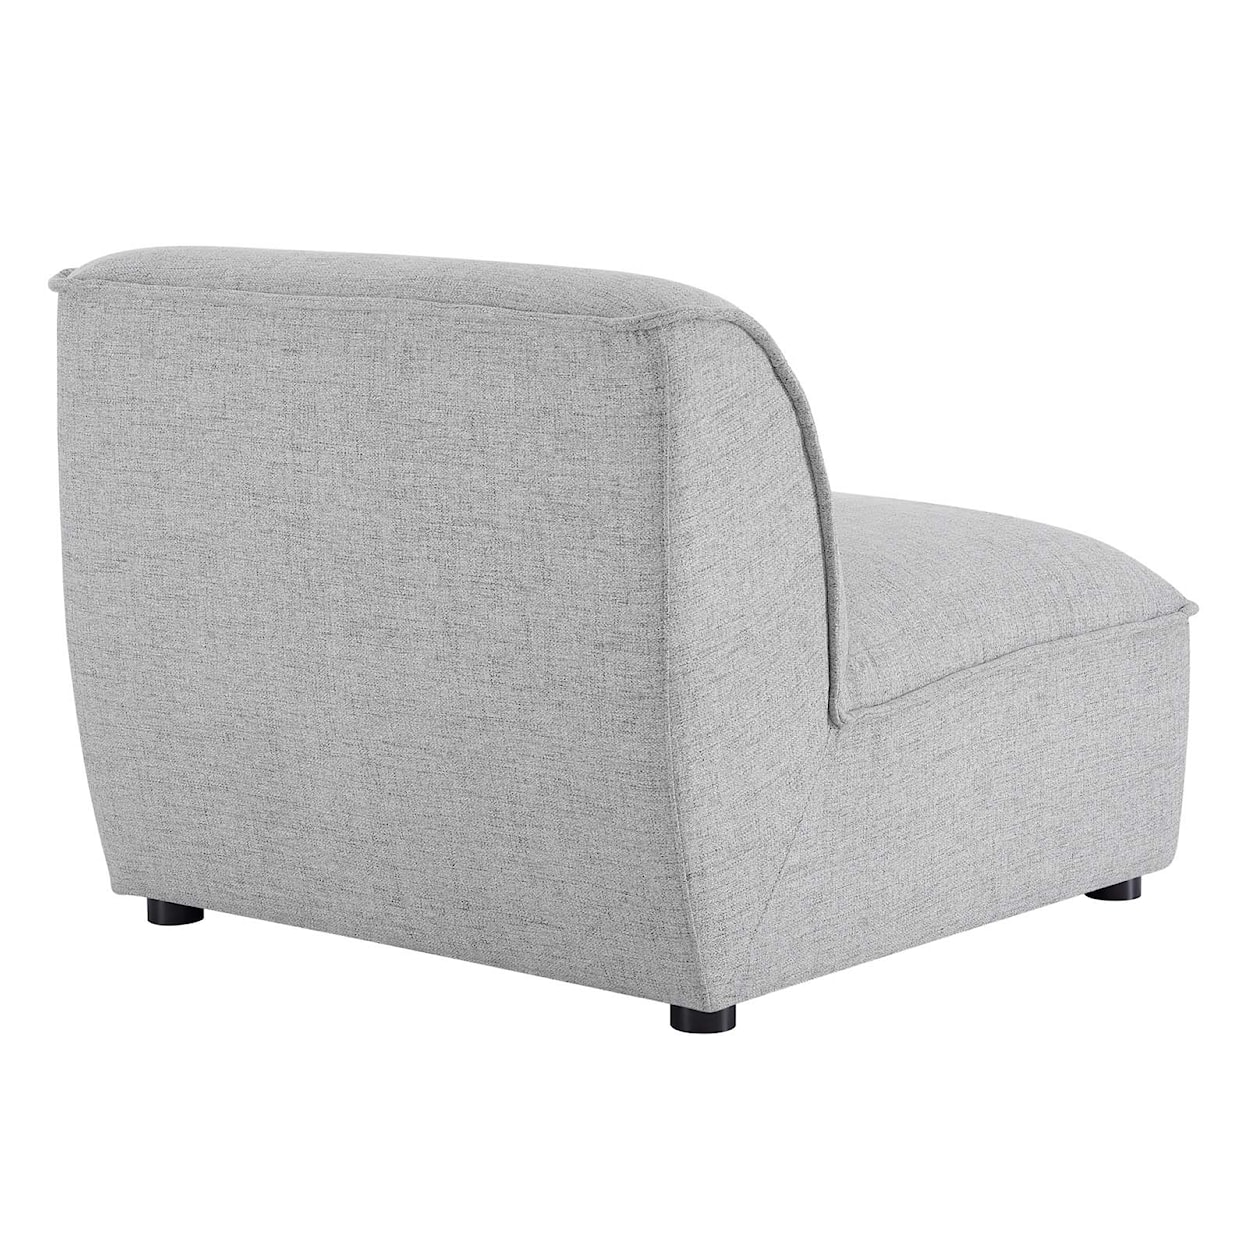 Modway Comprise Armless Chair